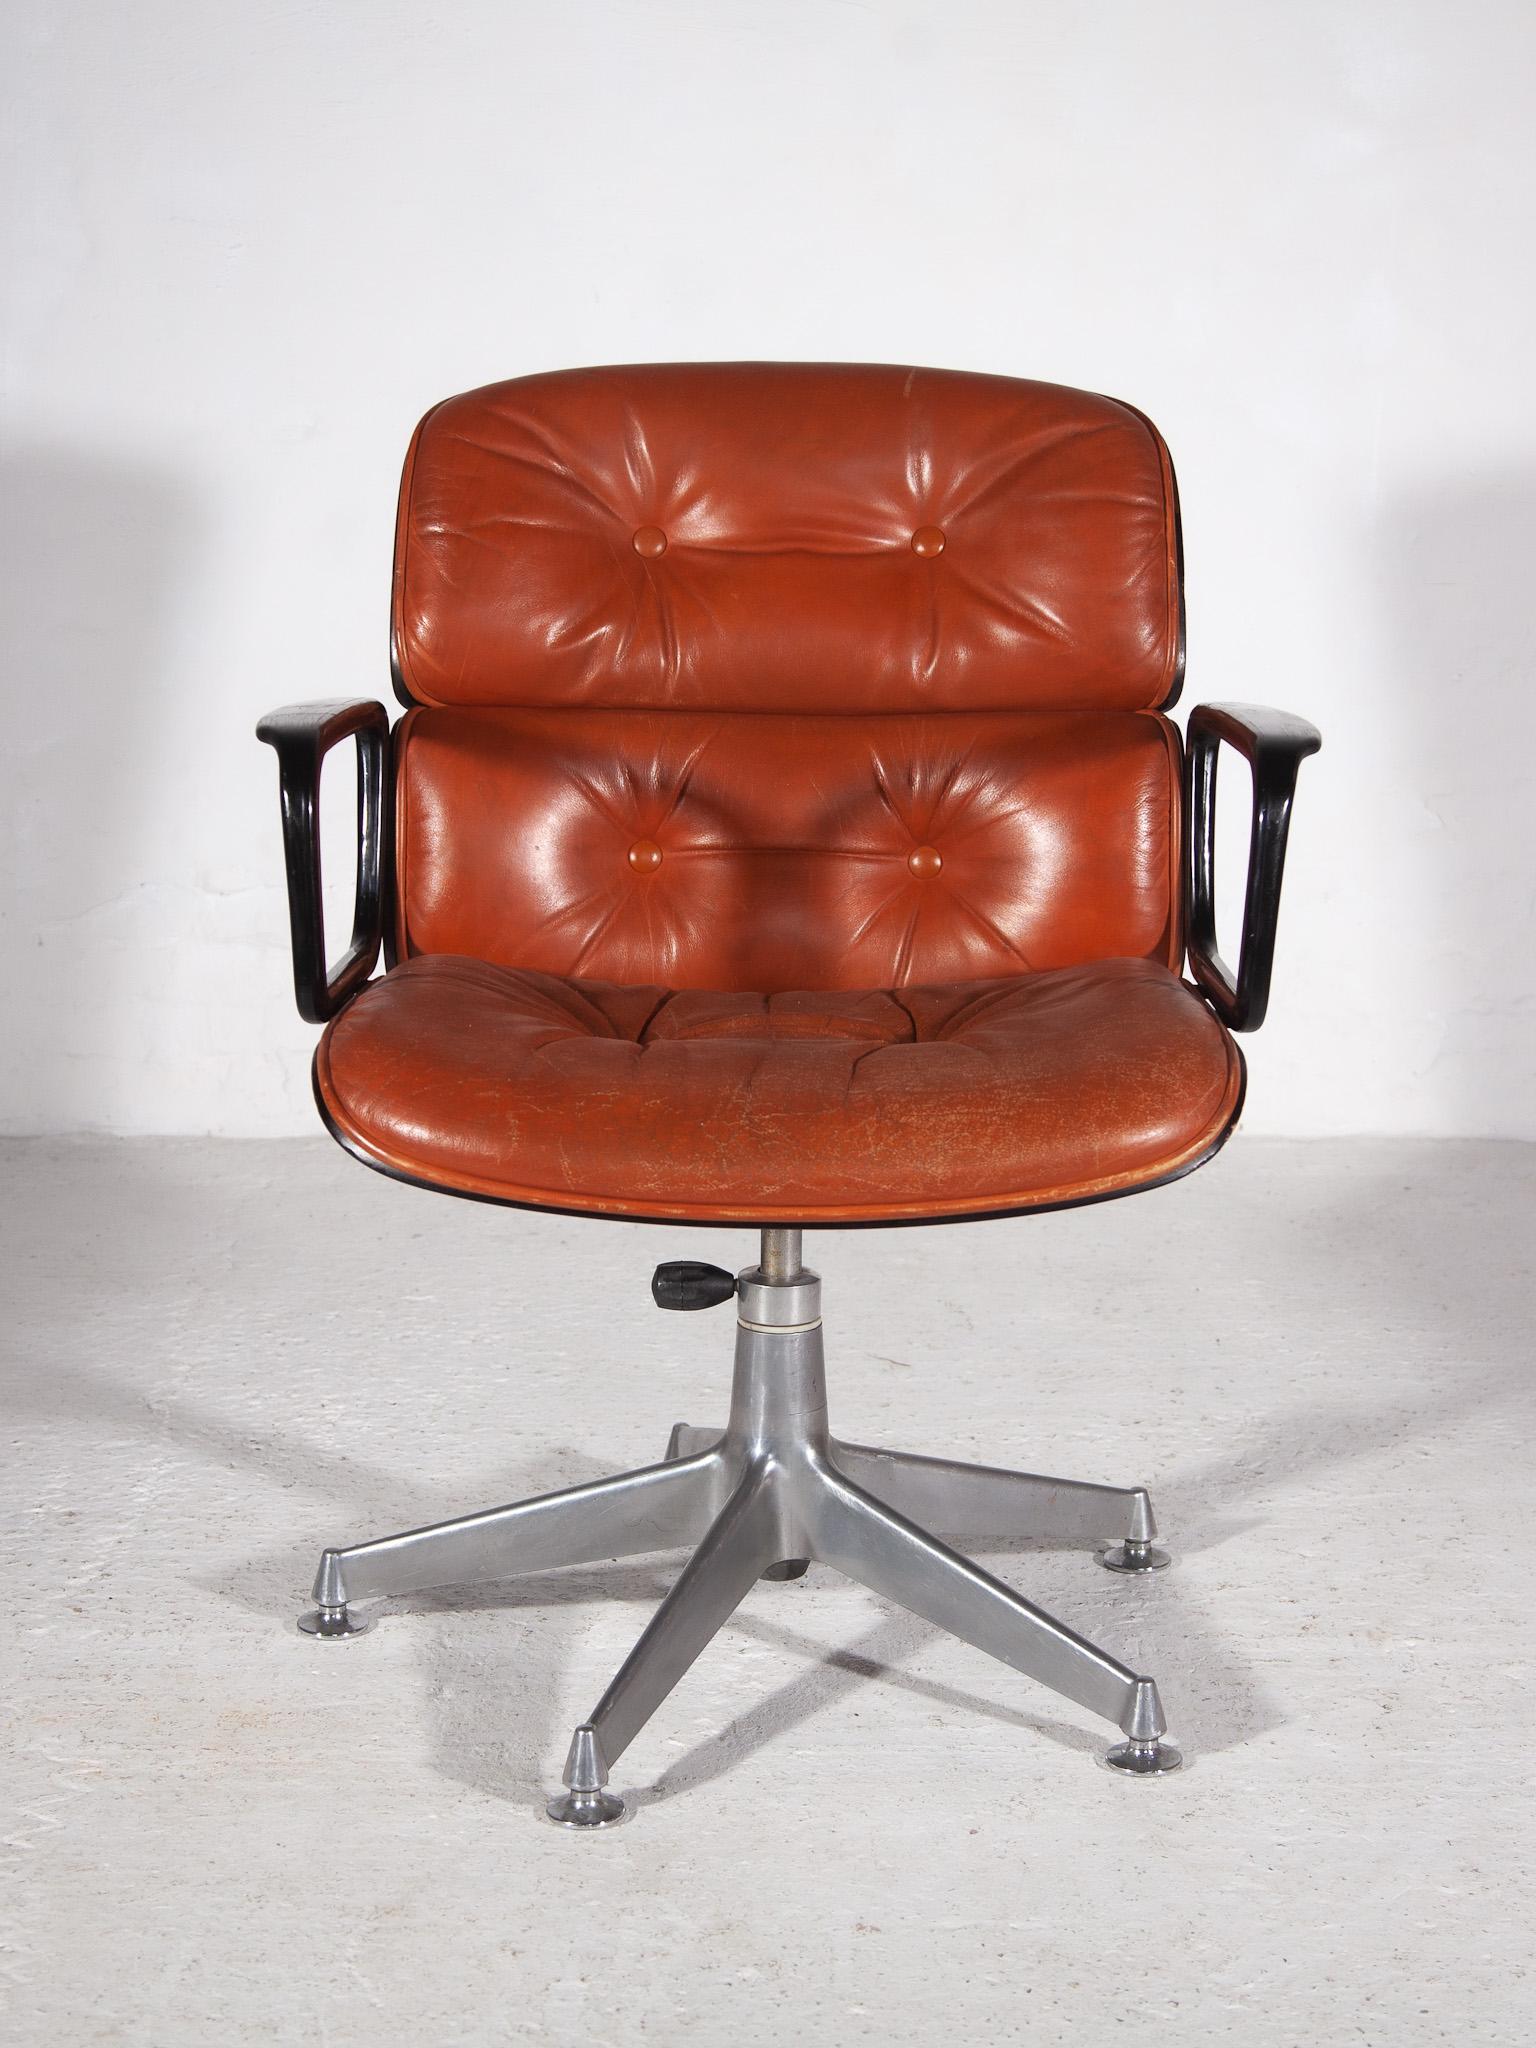 Mid-Century Modern plywood and leather desk chair designed by Ico Parisi for MIM Rome, Italy. This chair is not only stylish but also a work of art that will be the focal point of any room. The sleek and elegant design is a perfect blend of vintage